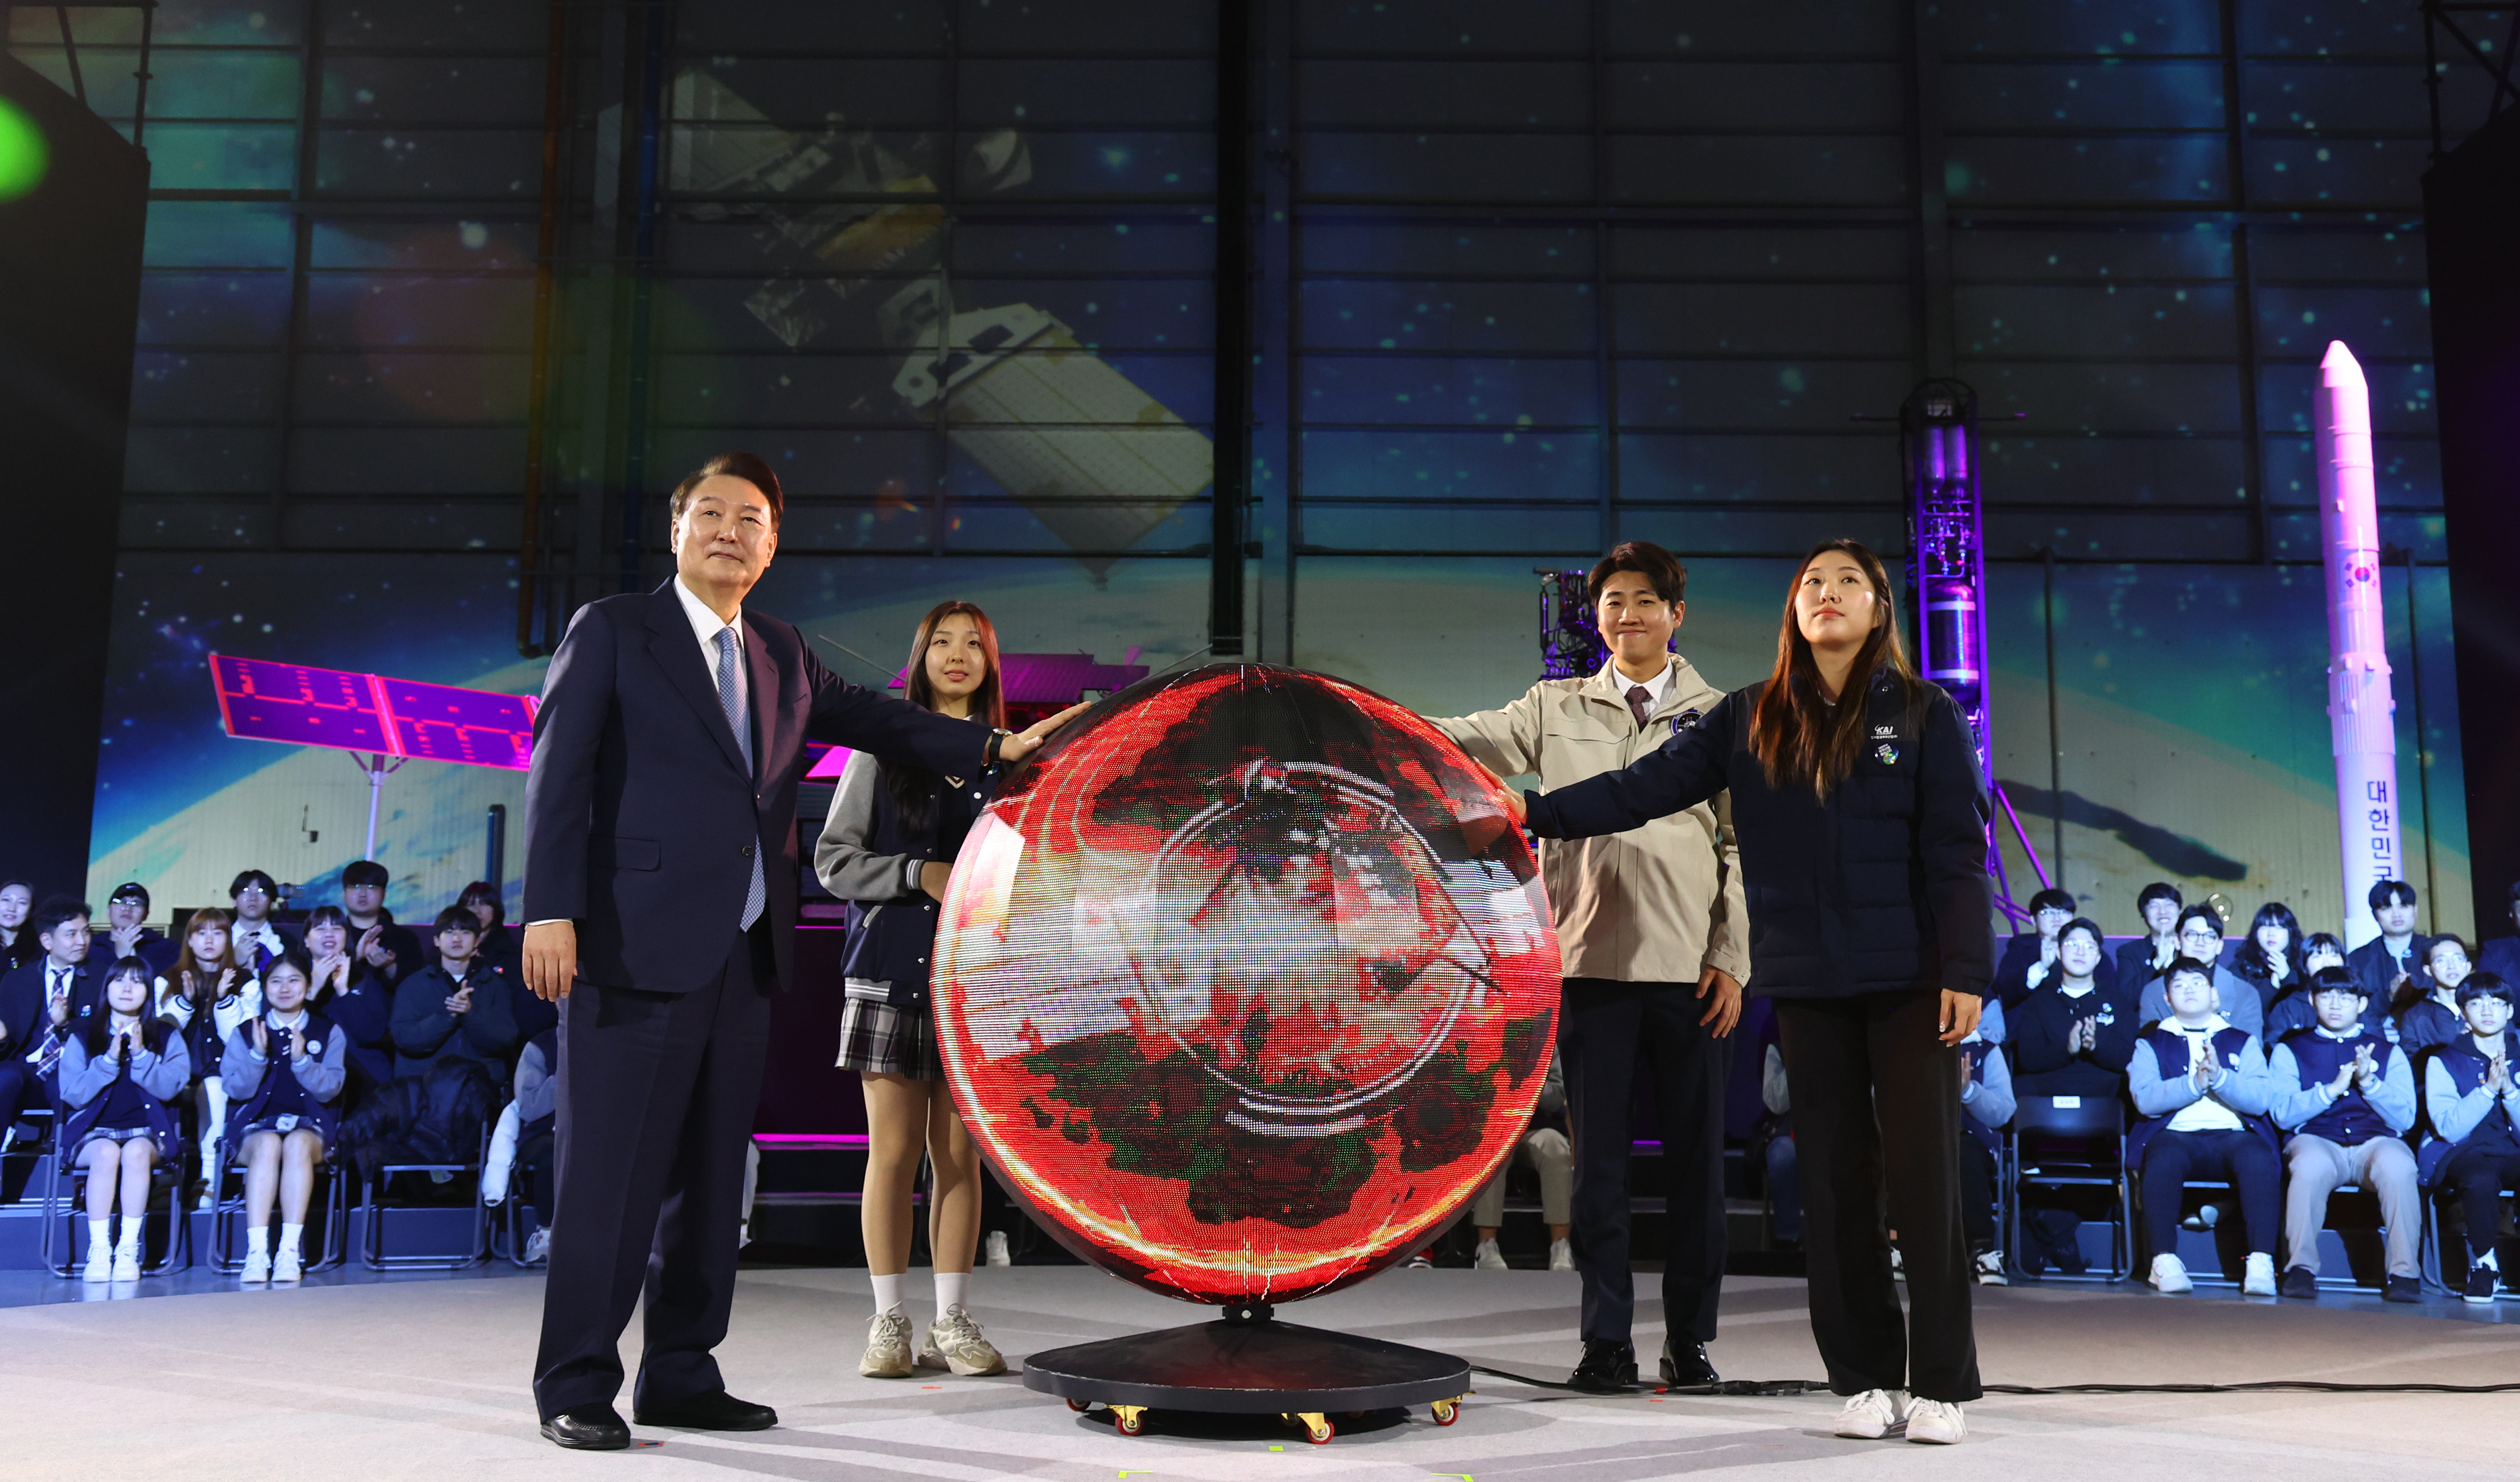 President Yoon on March 13 places his hands on a metal globe as part of a performance at the launching ceremony for a new national cluster for the space industry at Korea Aerospace Industries in Sacheon, Gyeongsangnam-do Province.